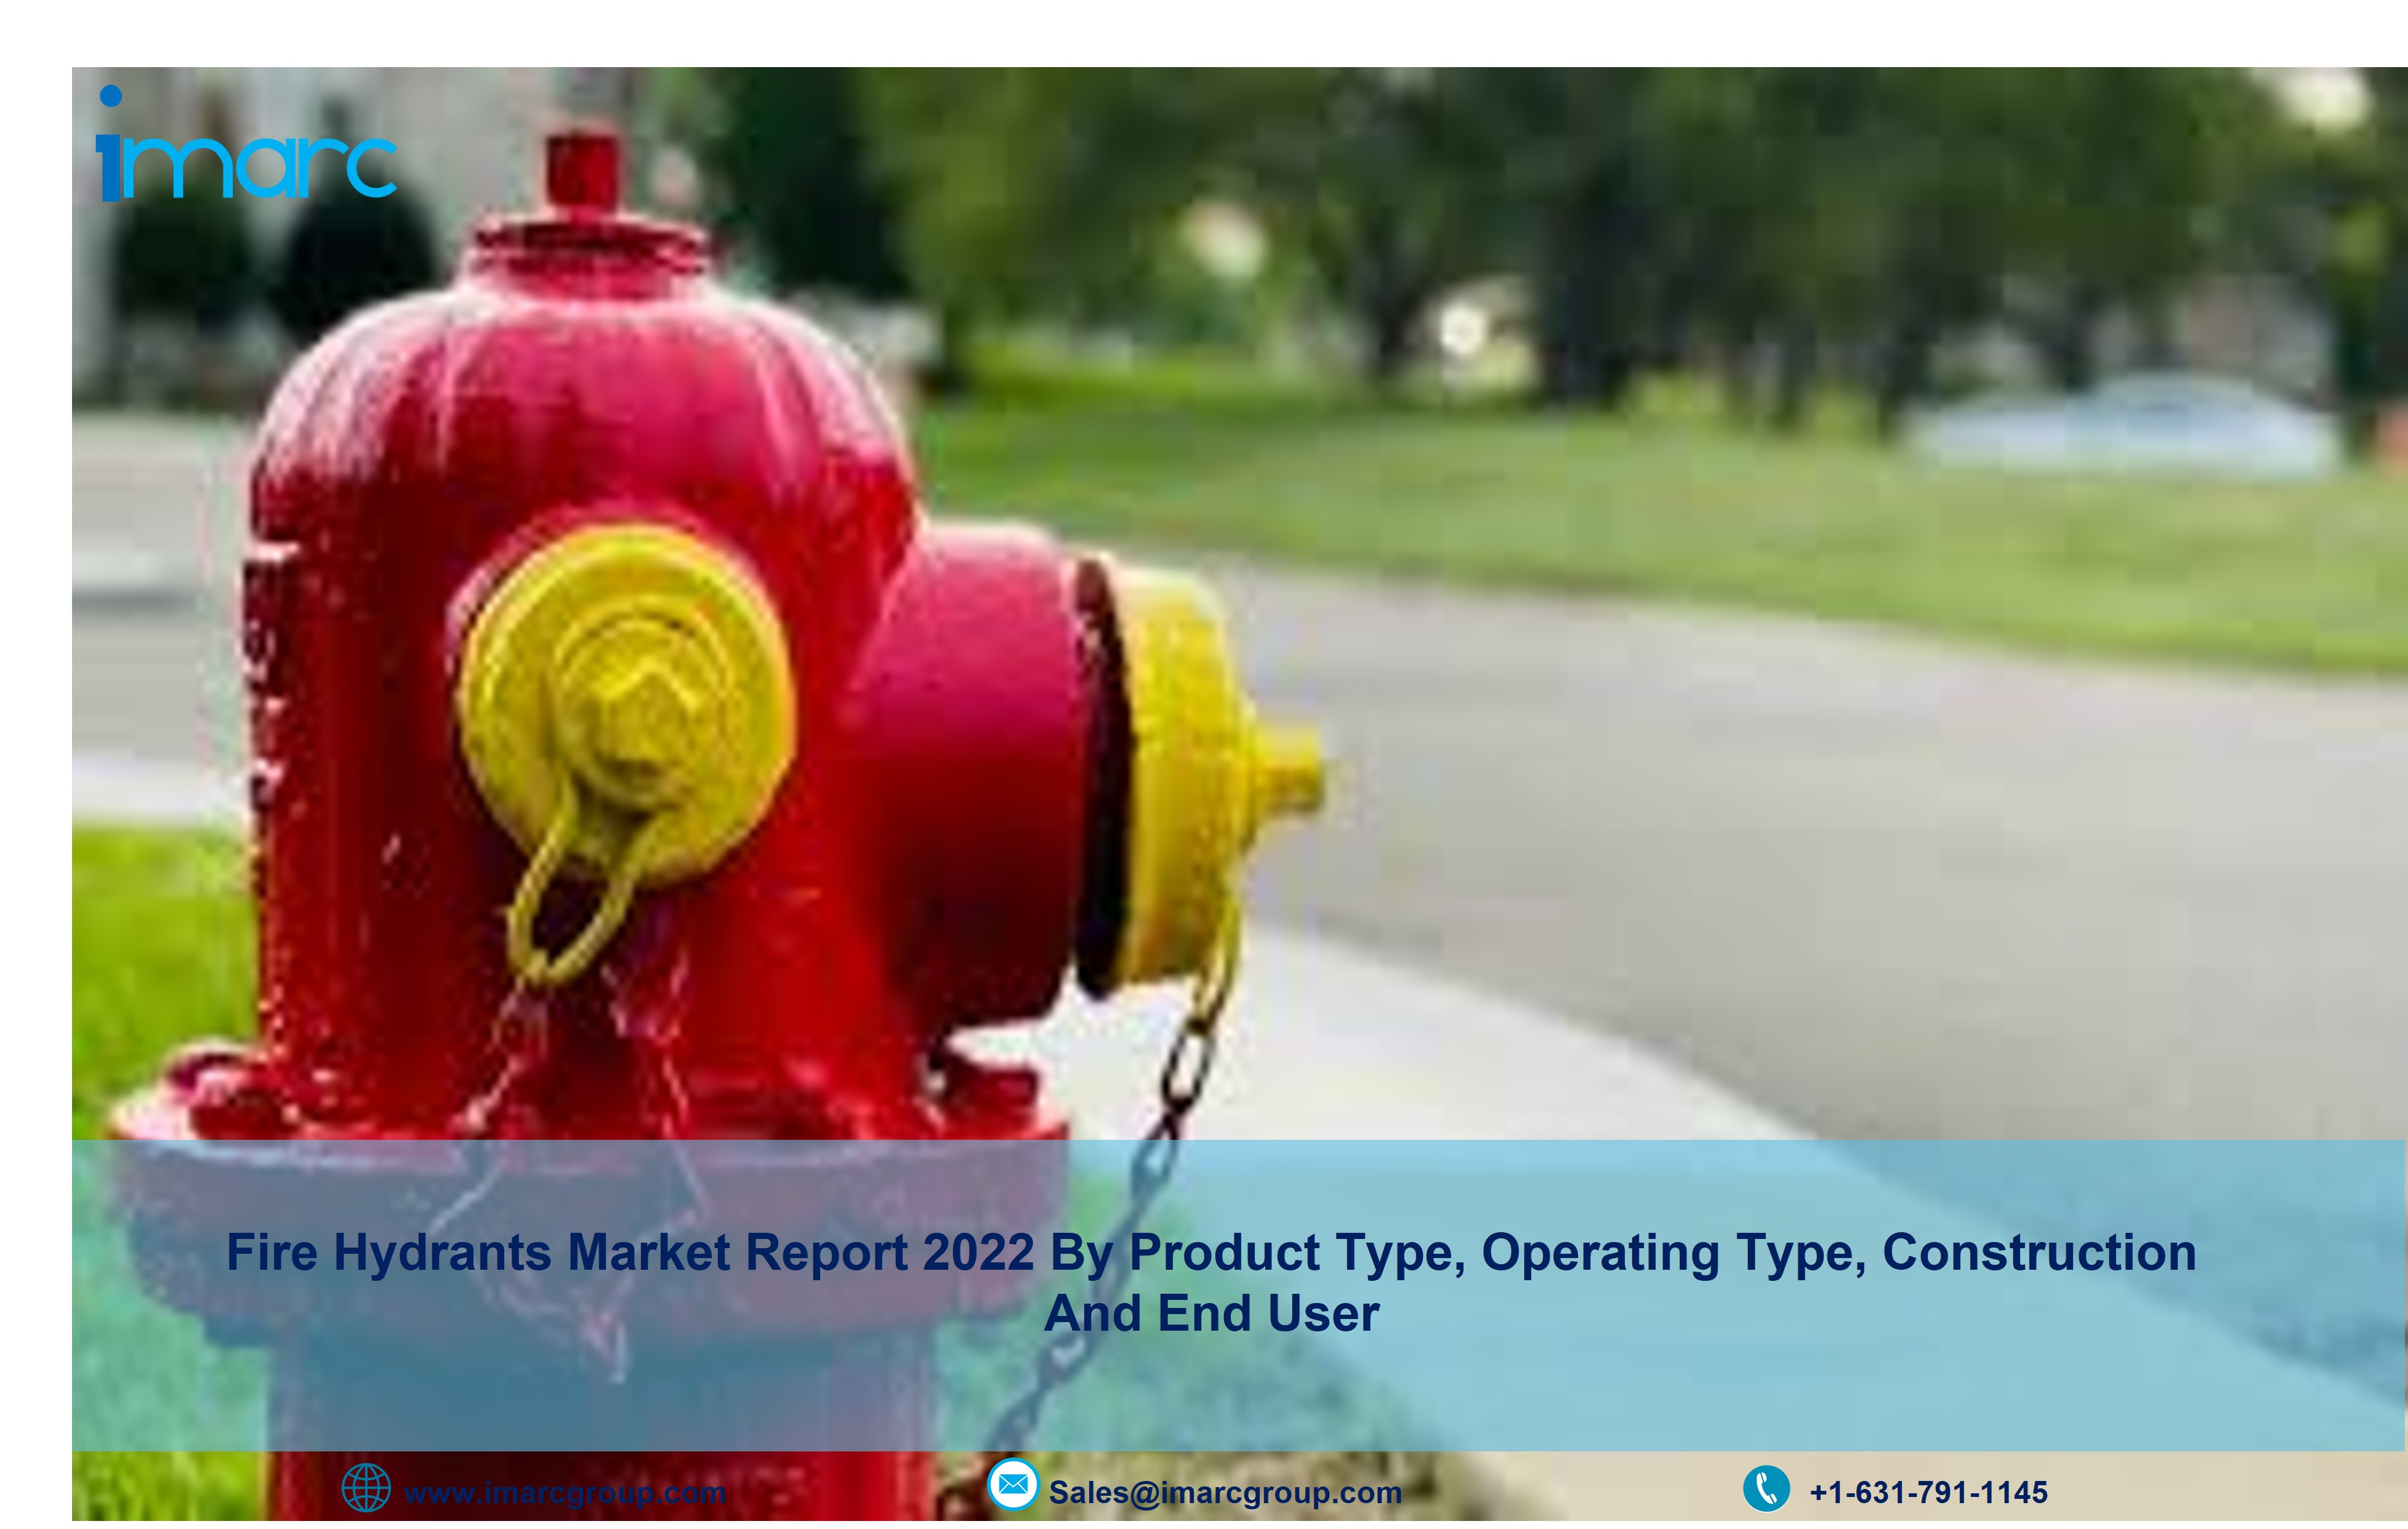 Fire Hydrants Market to Reach US$ 1.63 Billion by 2027 | IMARC Group